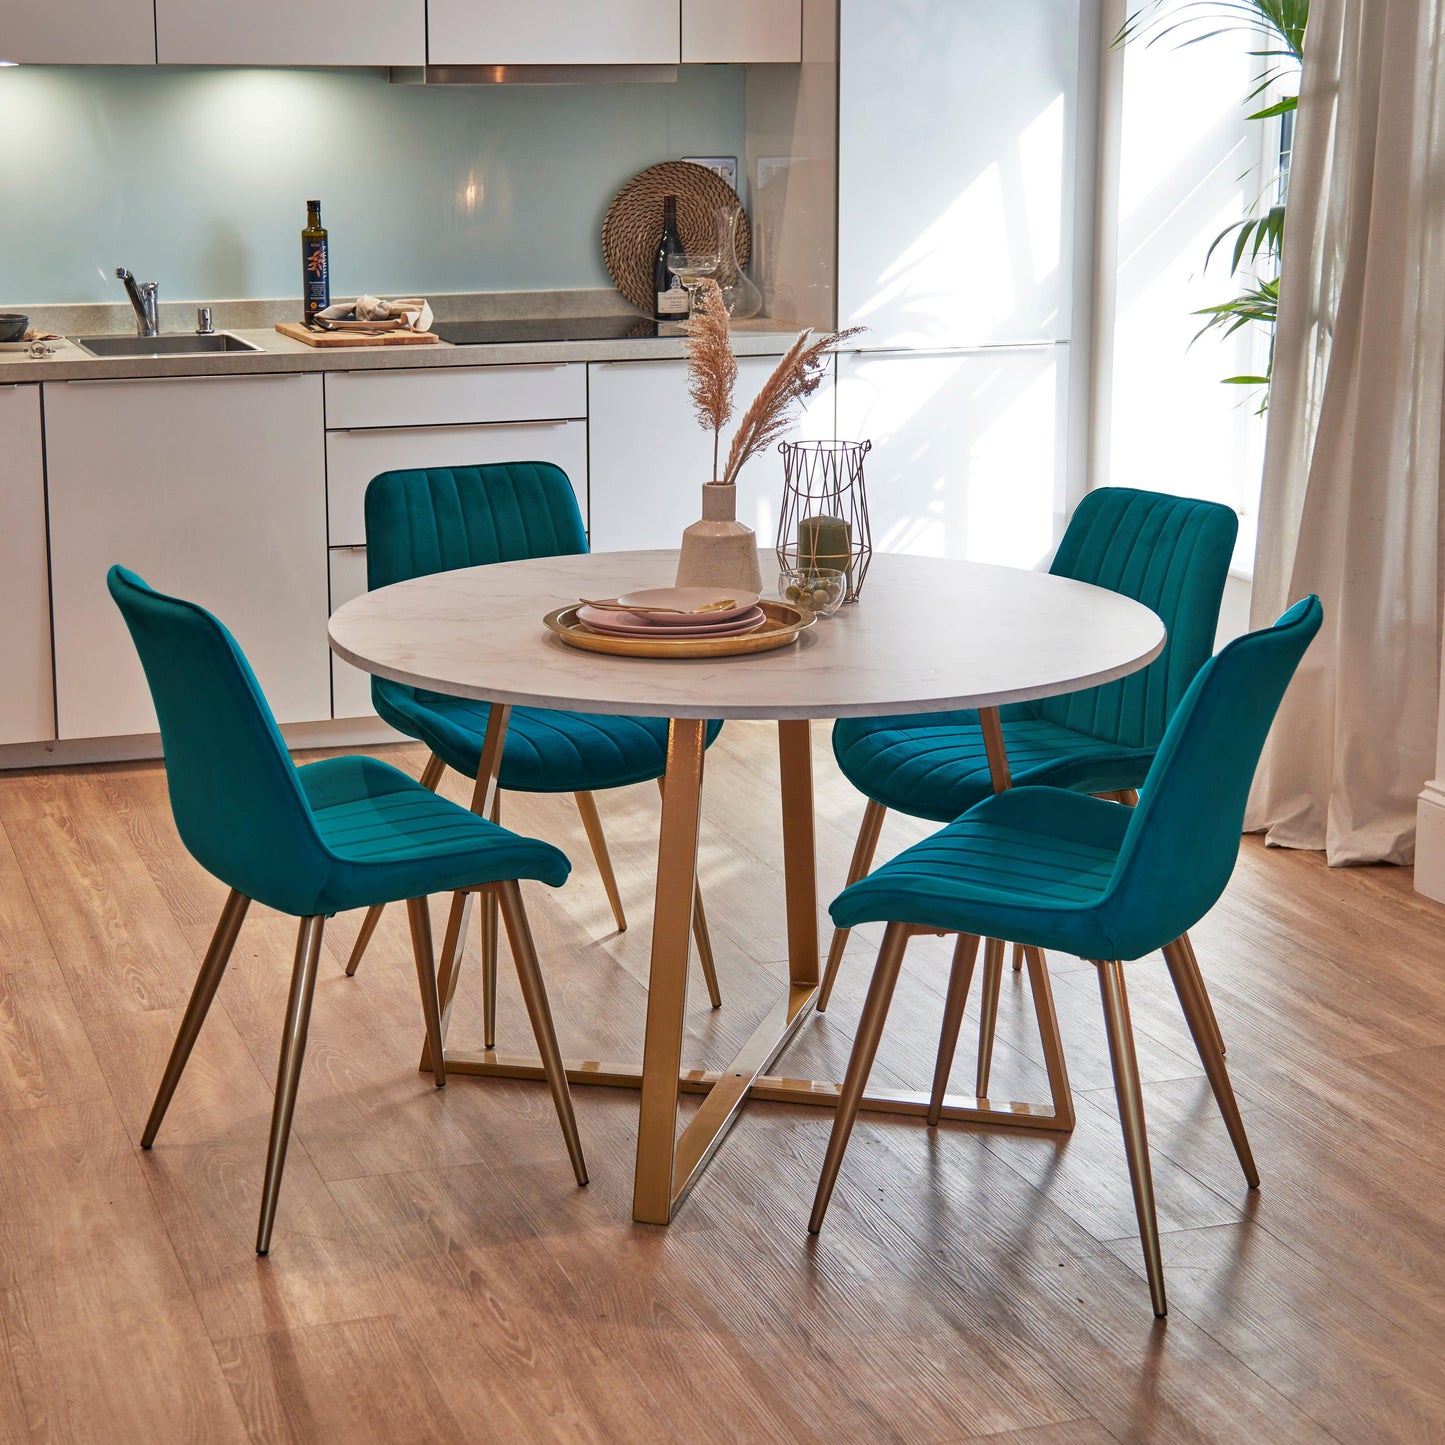 Clara Marble Dining Table Set - 4 Seater - Bella Teal Dining Chairs with Gold Legs - Laura James